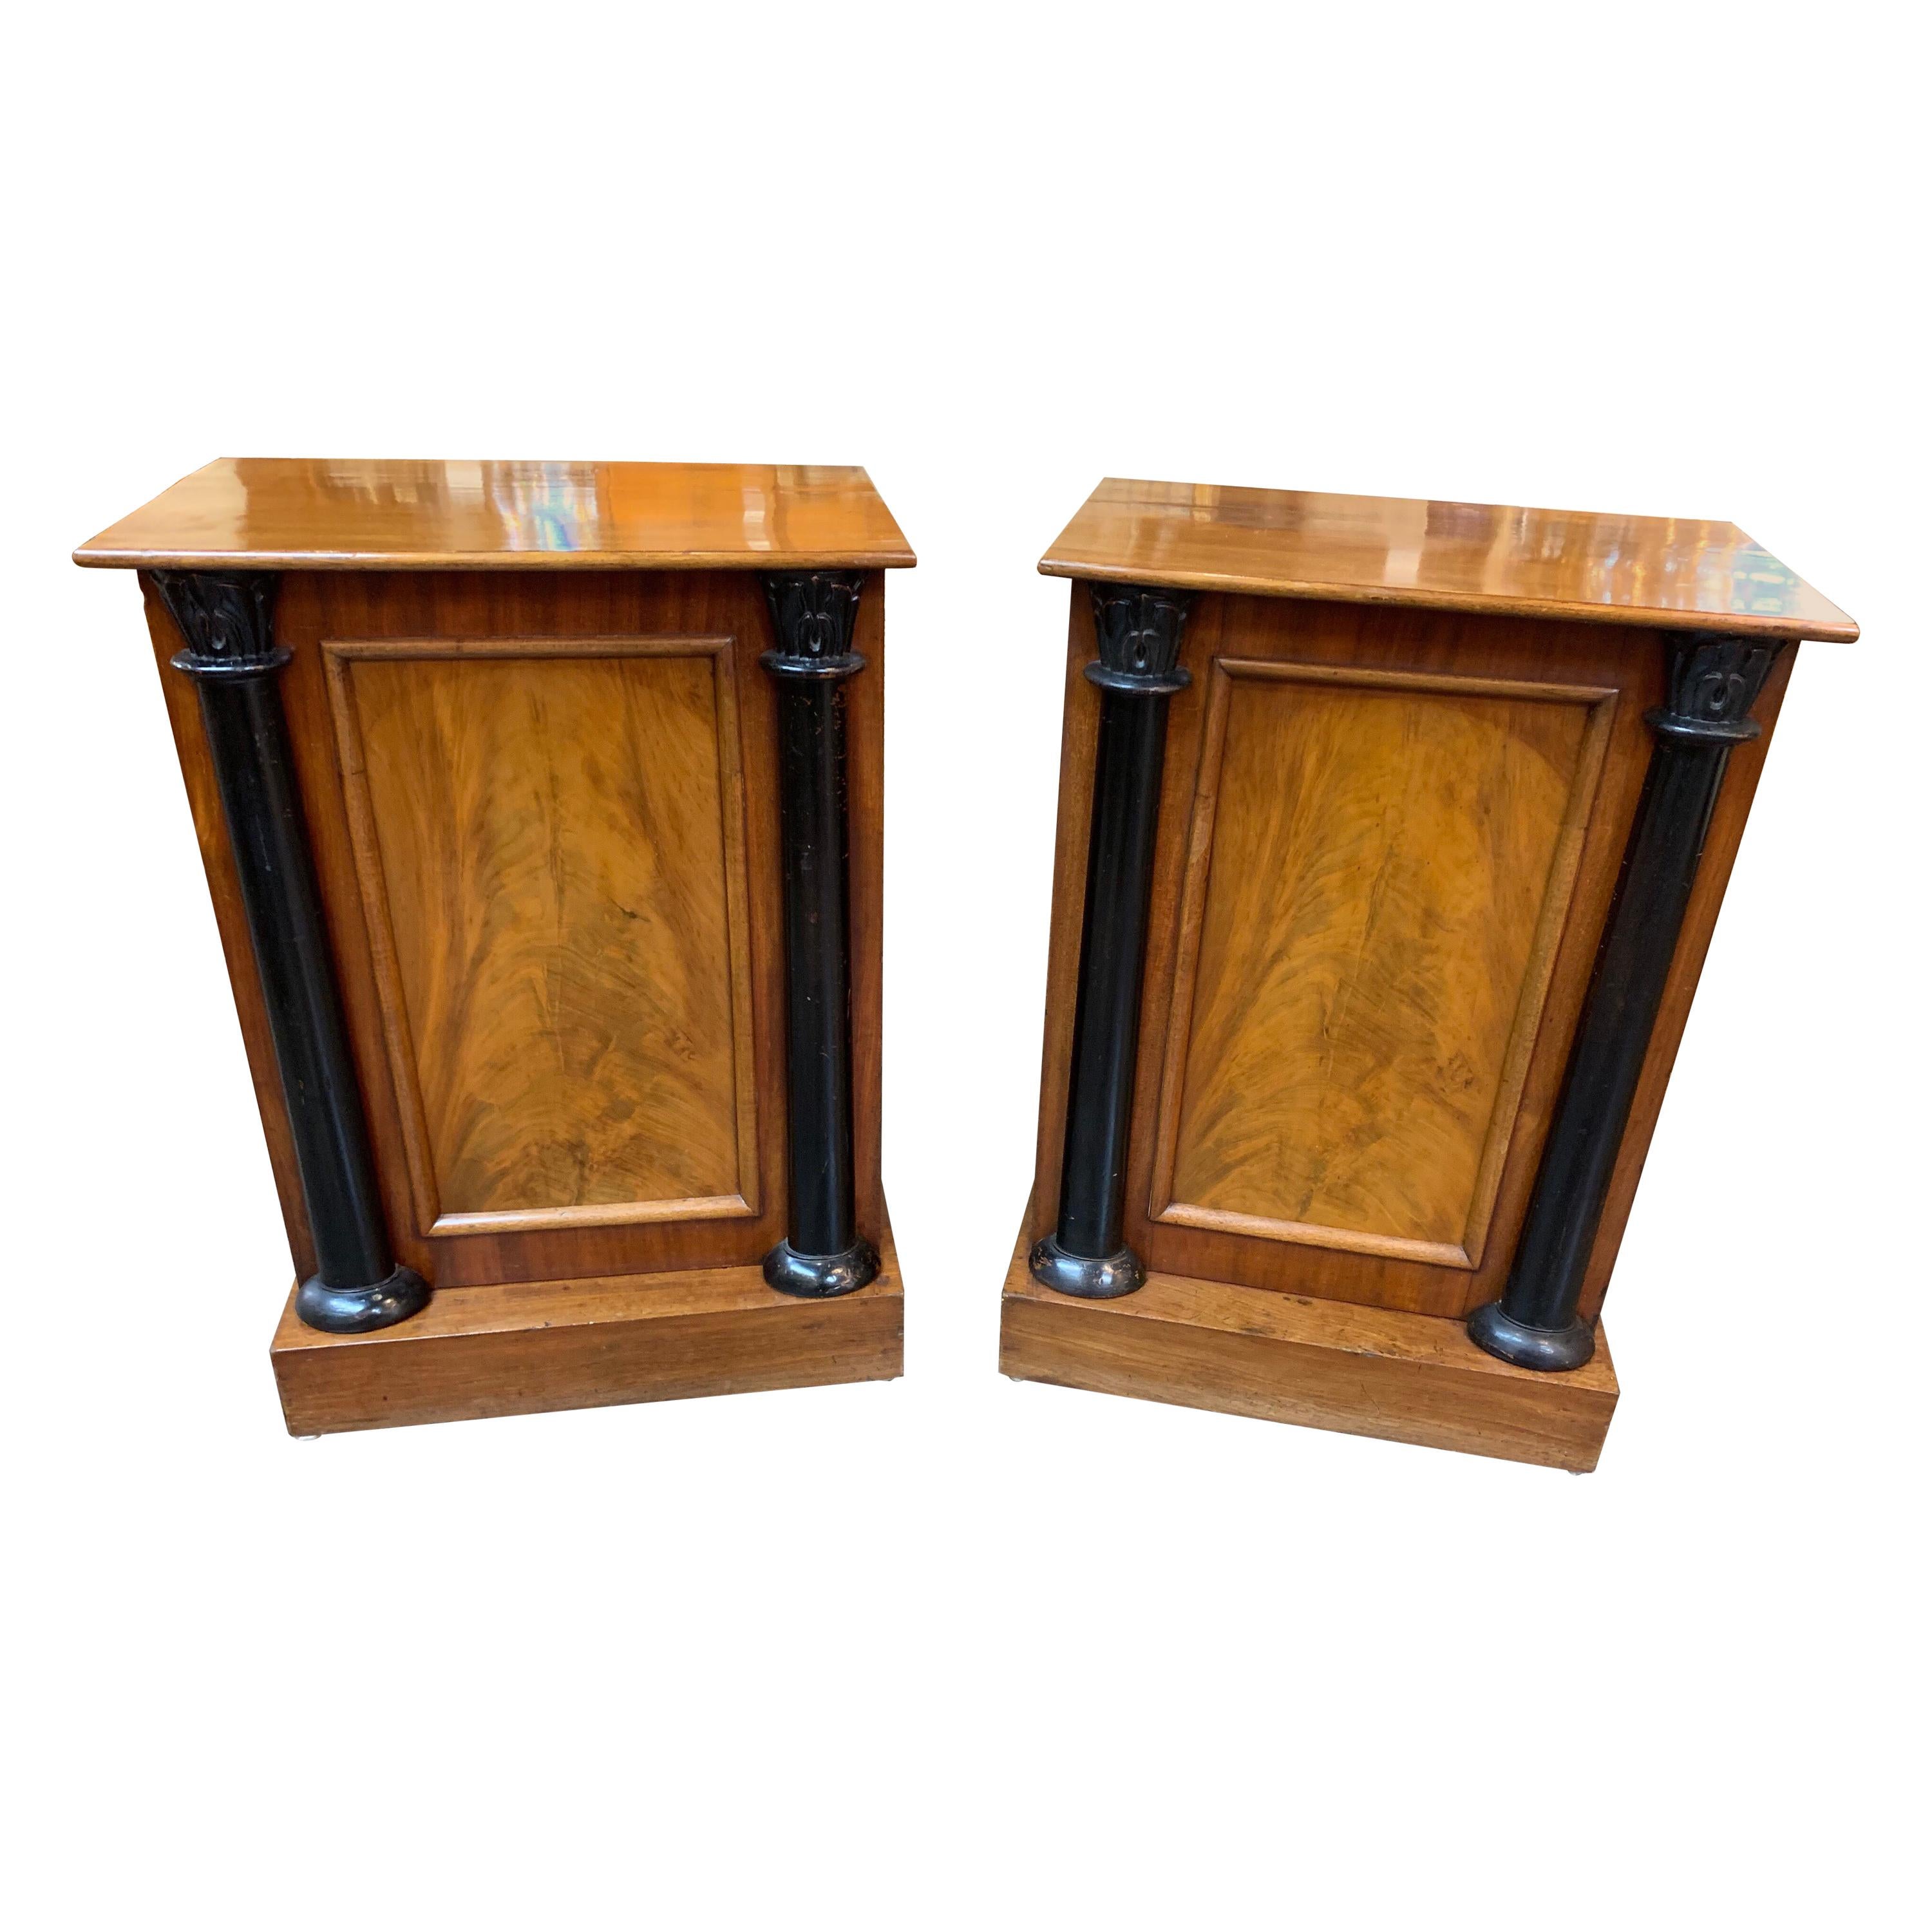 Pair of Continental Empire Style Walnut and Ebonized Side Cabinets